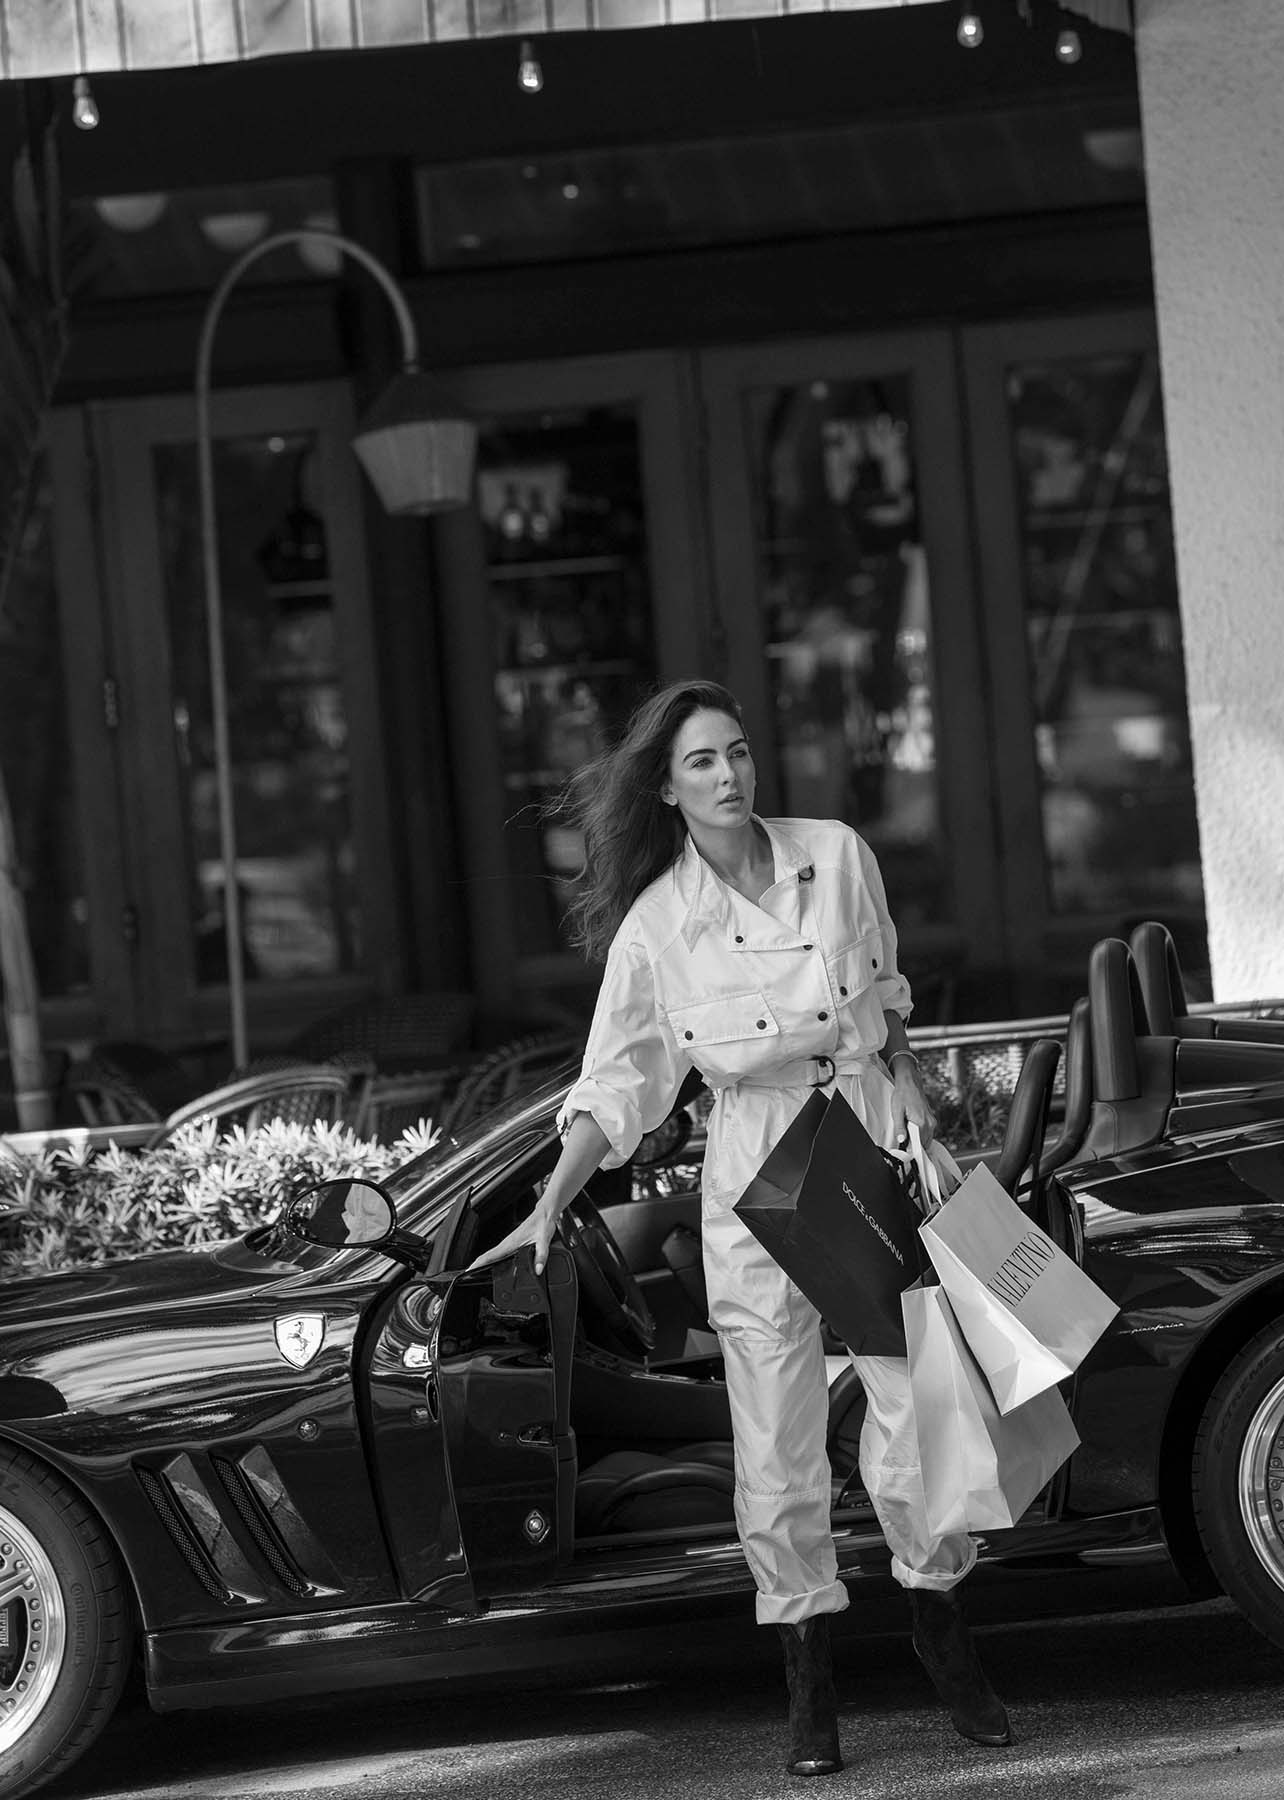 Model closes car door while holding shopping bags